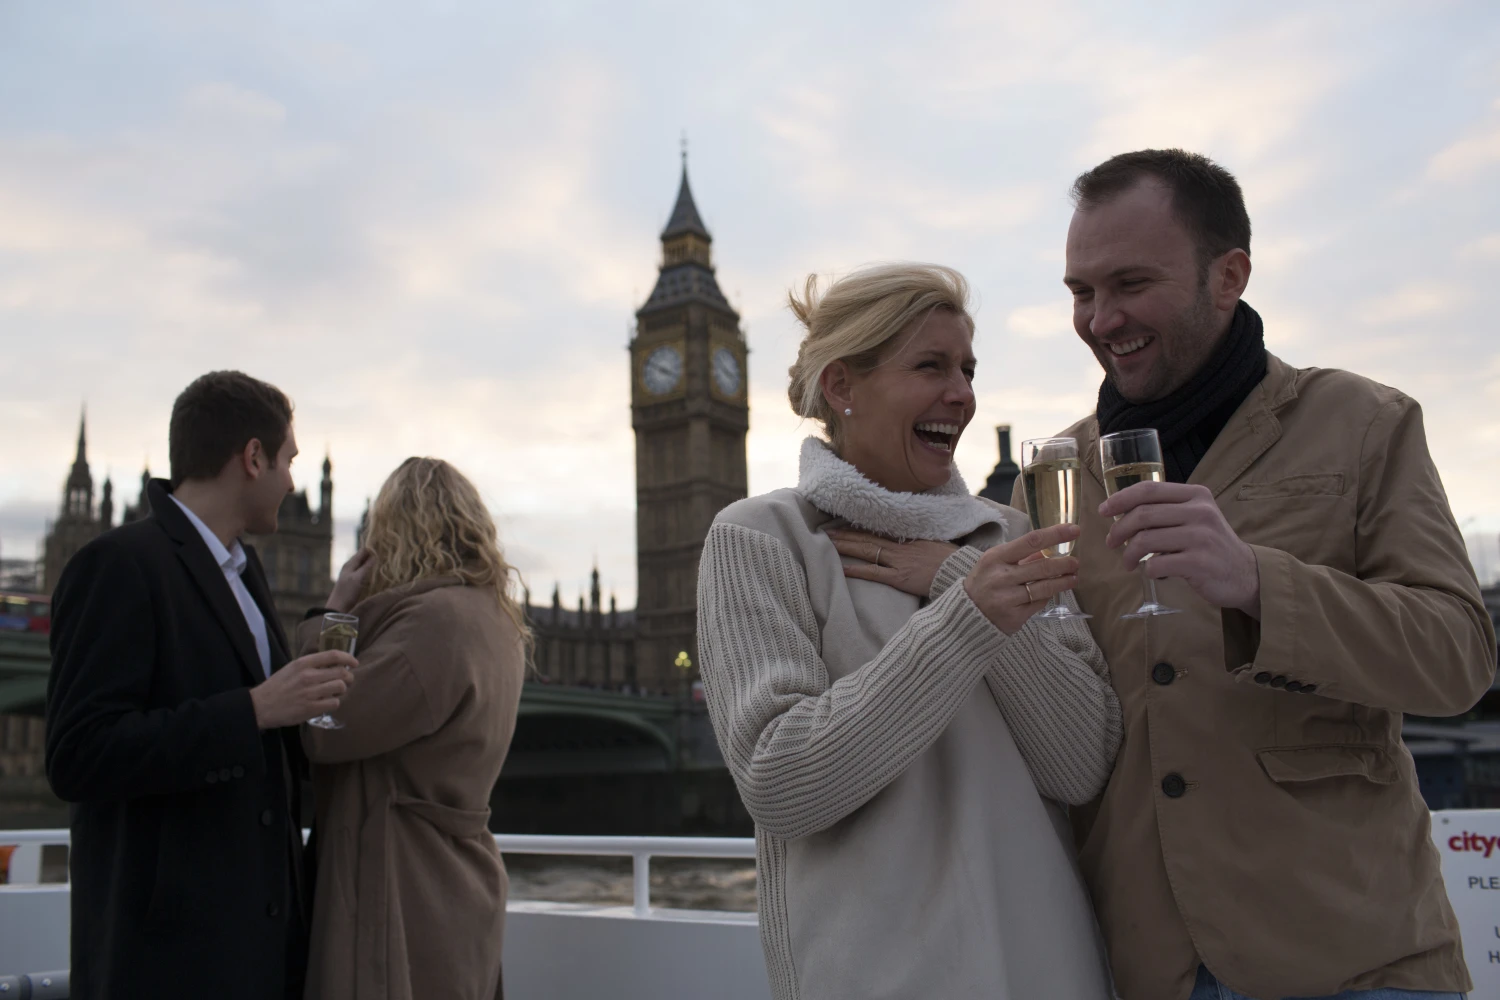 City Cruises -  Evening Cruise on the River Thames: What to expect - 3